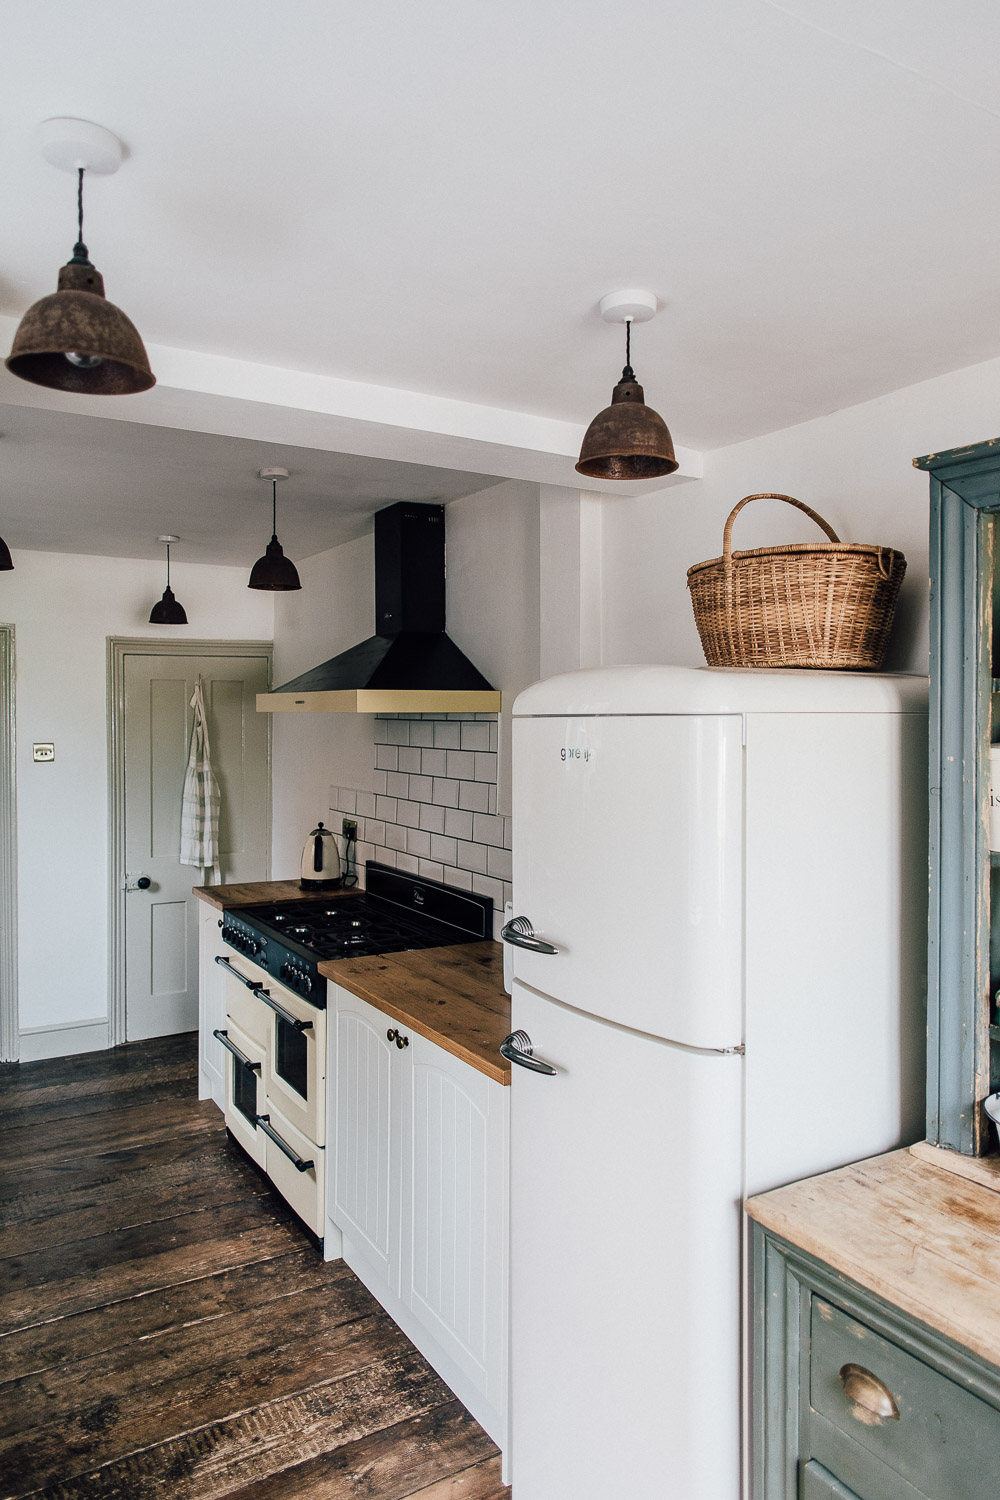 Neutral wickes kitchen with vintage details